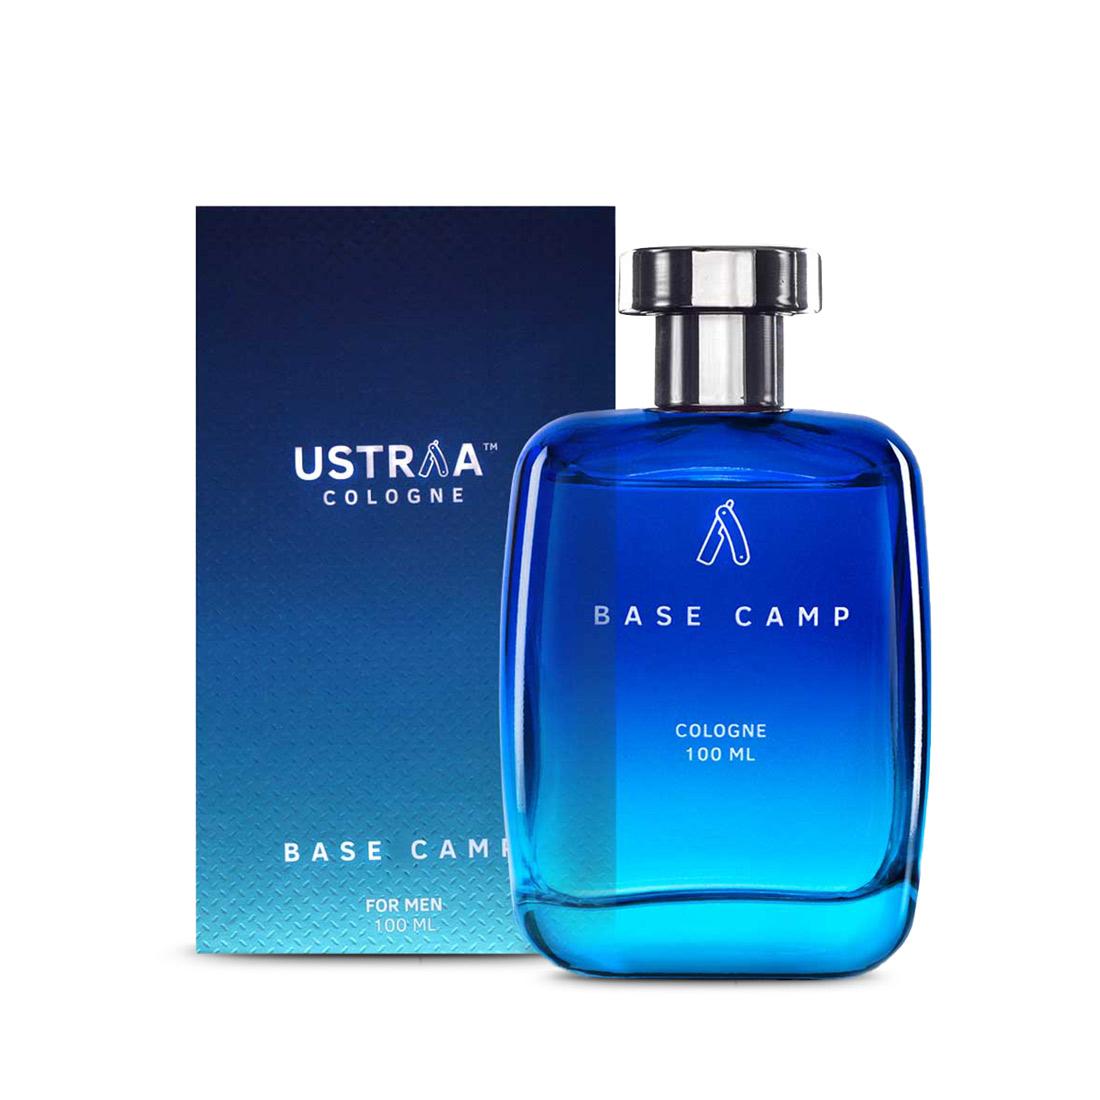 Ustraa Base Camp Cologne with cool & crisp fragrance of mountains - No Gas Perfume for Men